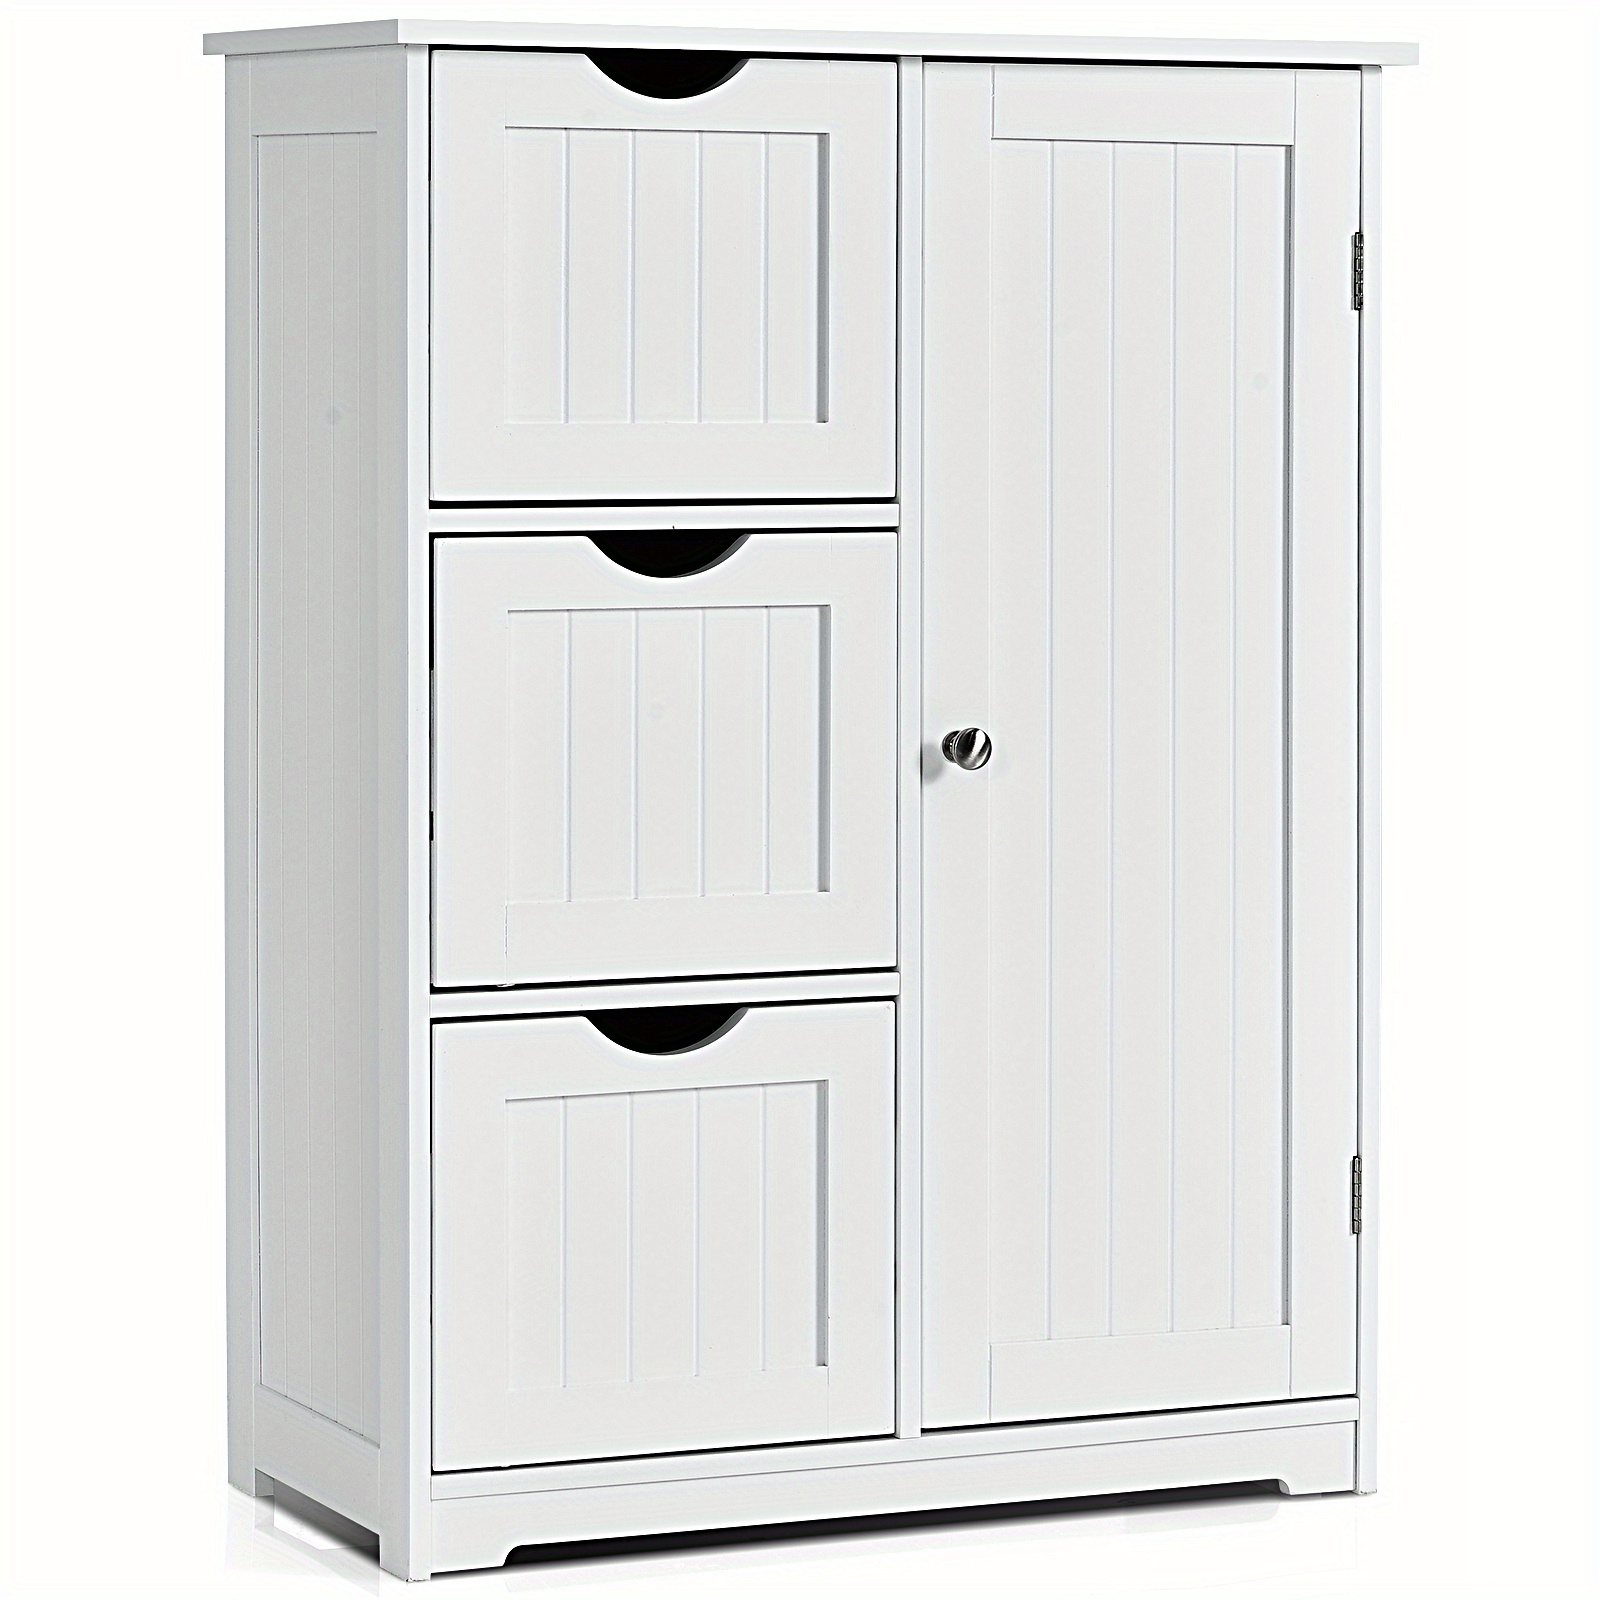 

Maxmass Bathroom Floor Cabinet Side Storage Cabinet With 3 Drawers And 1 Cupboard White